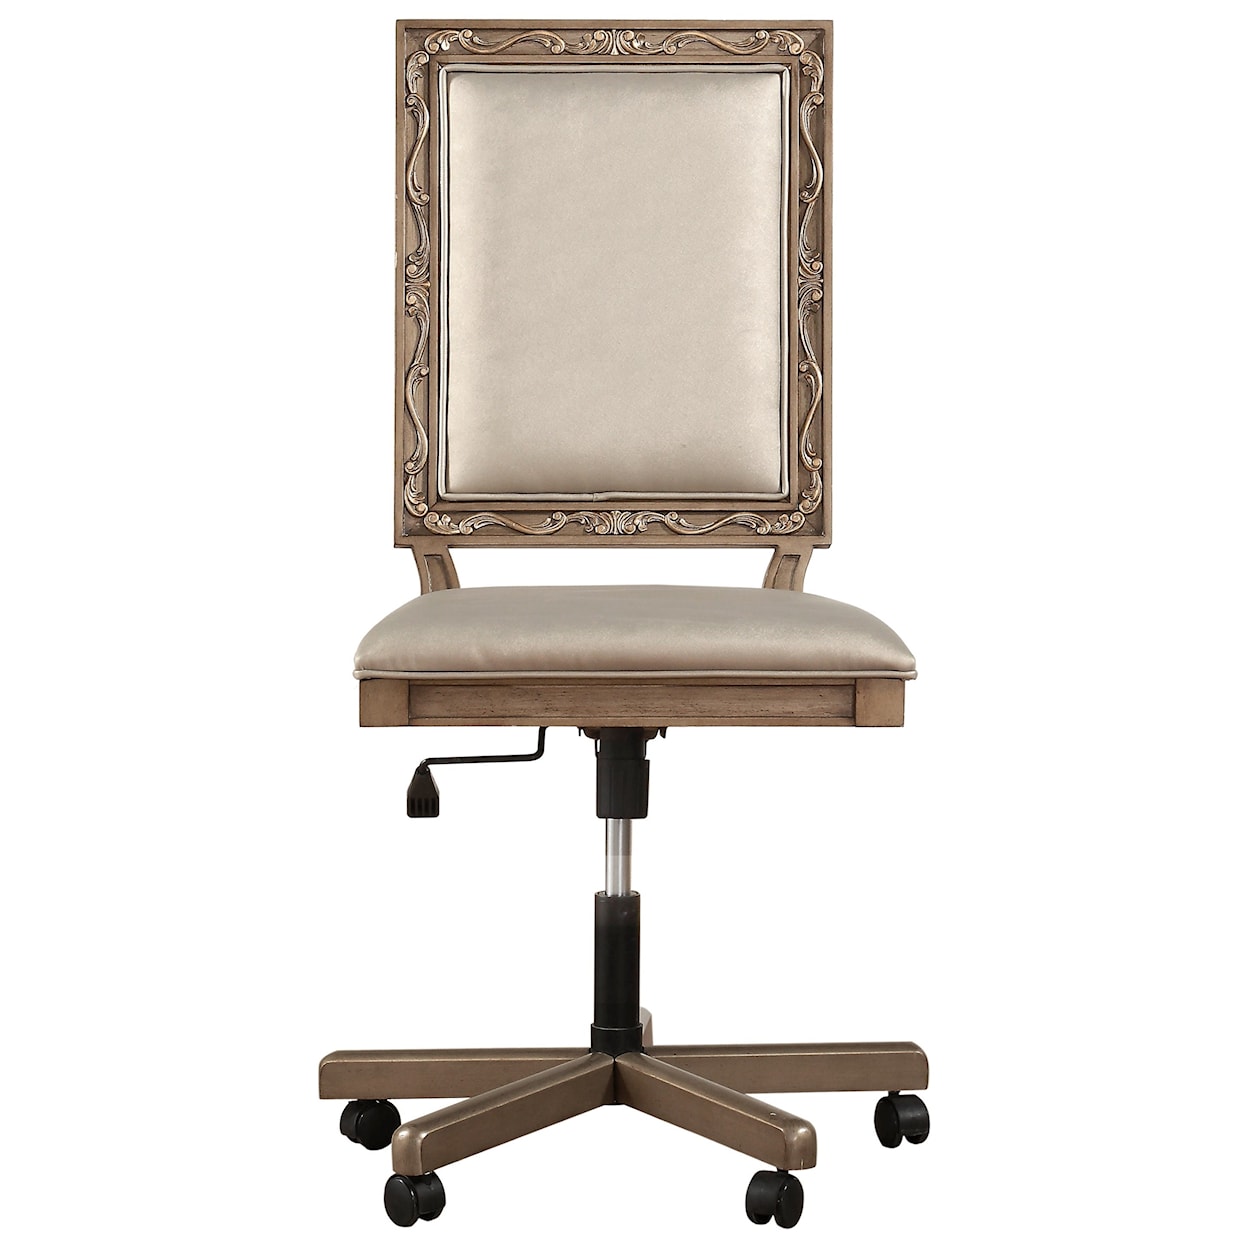 Acme Furniture Orianne Executive Office Chair